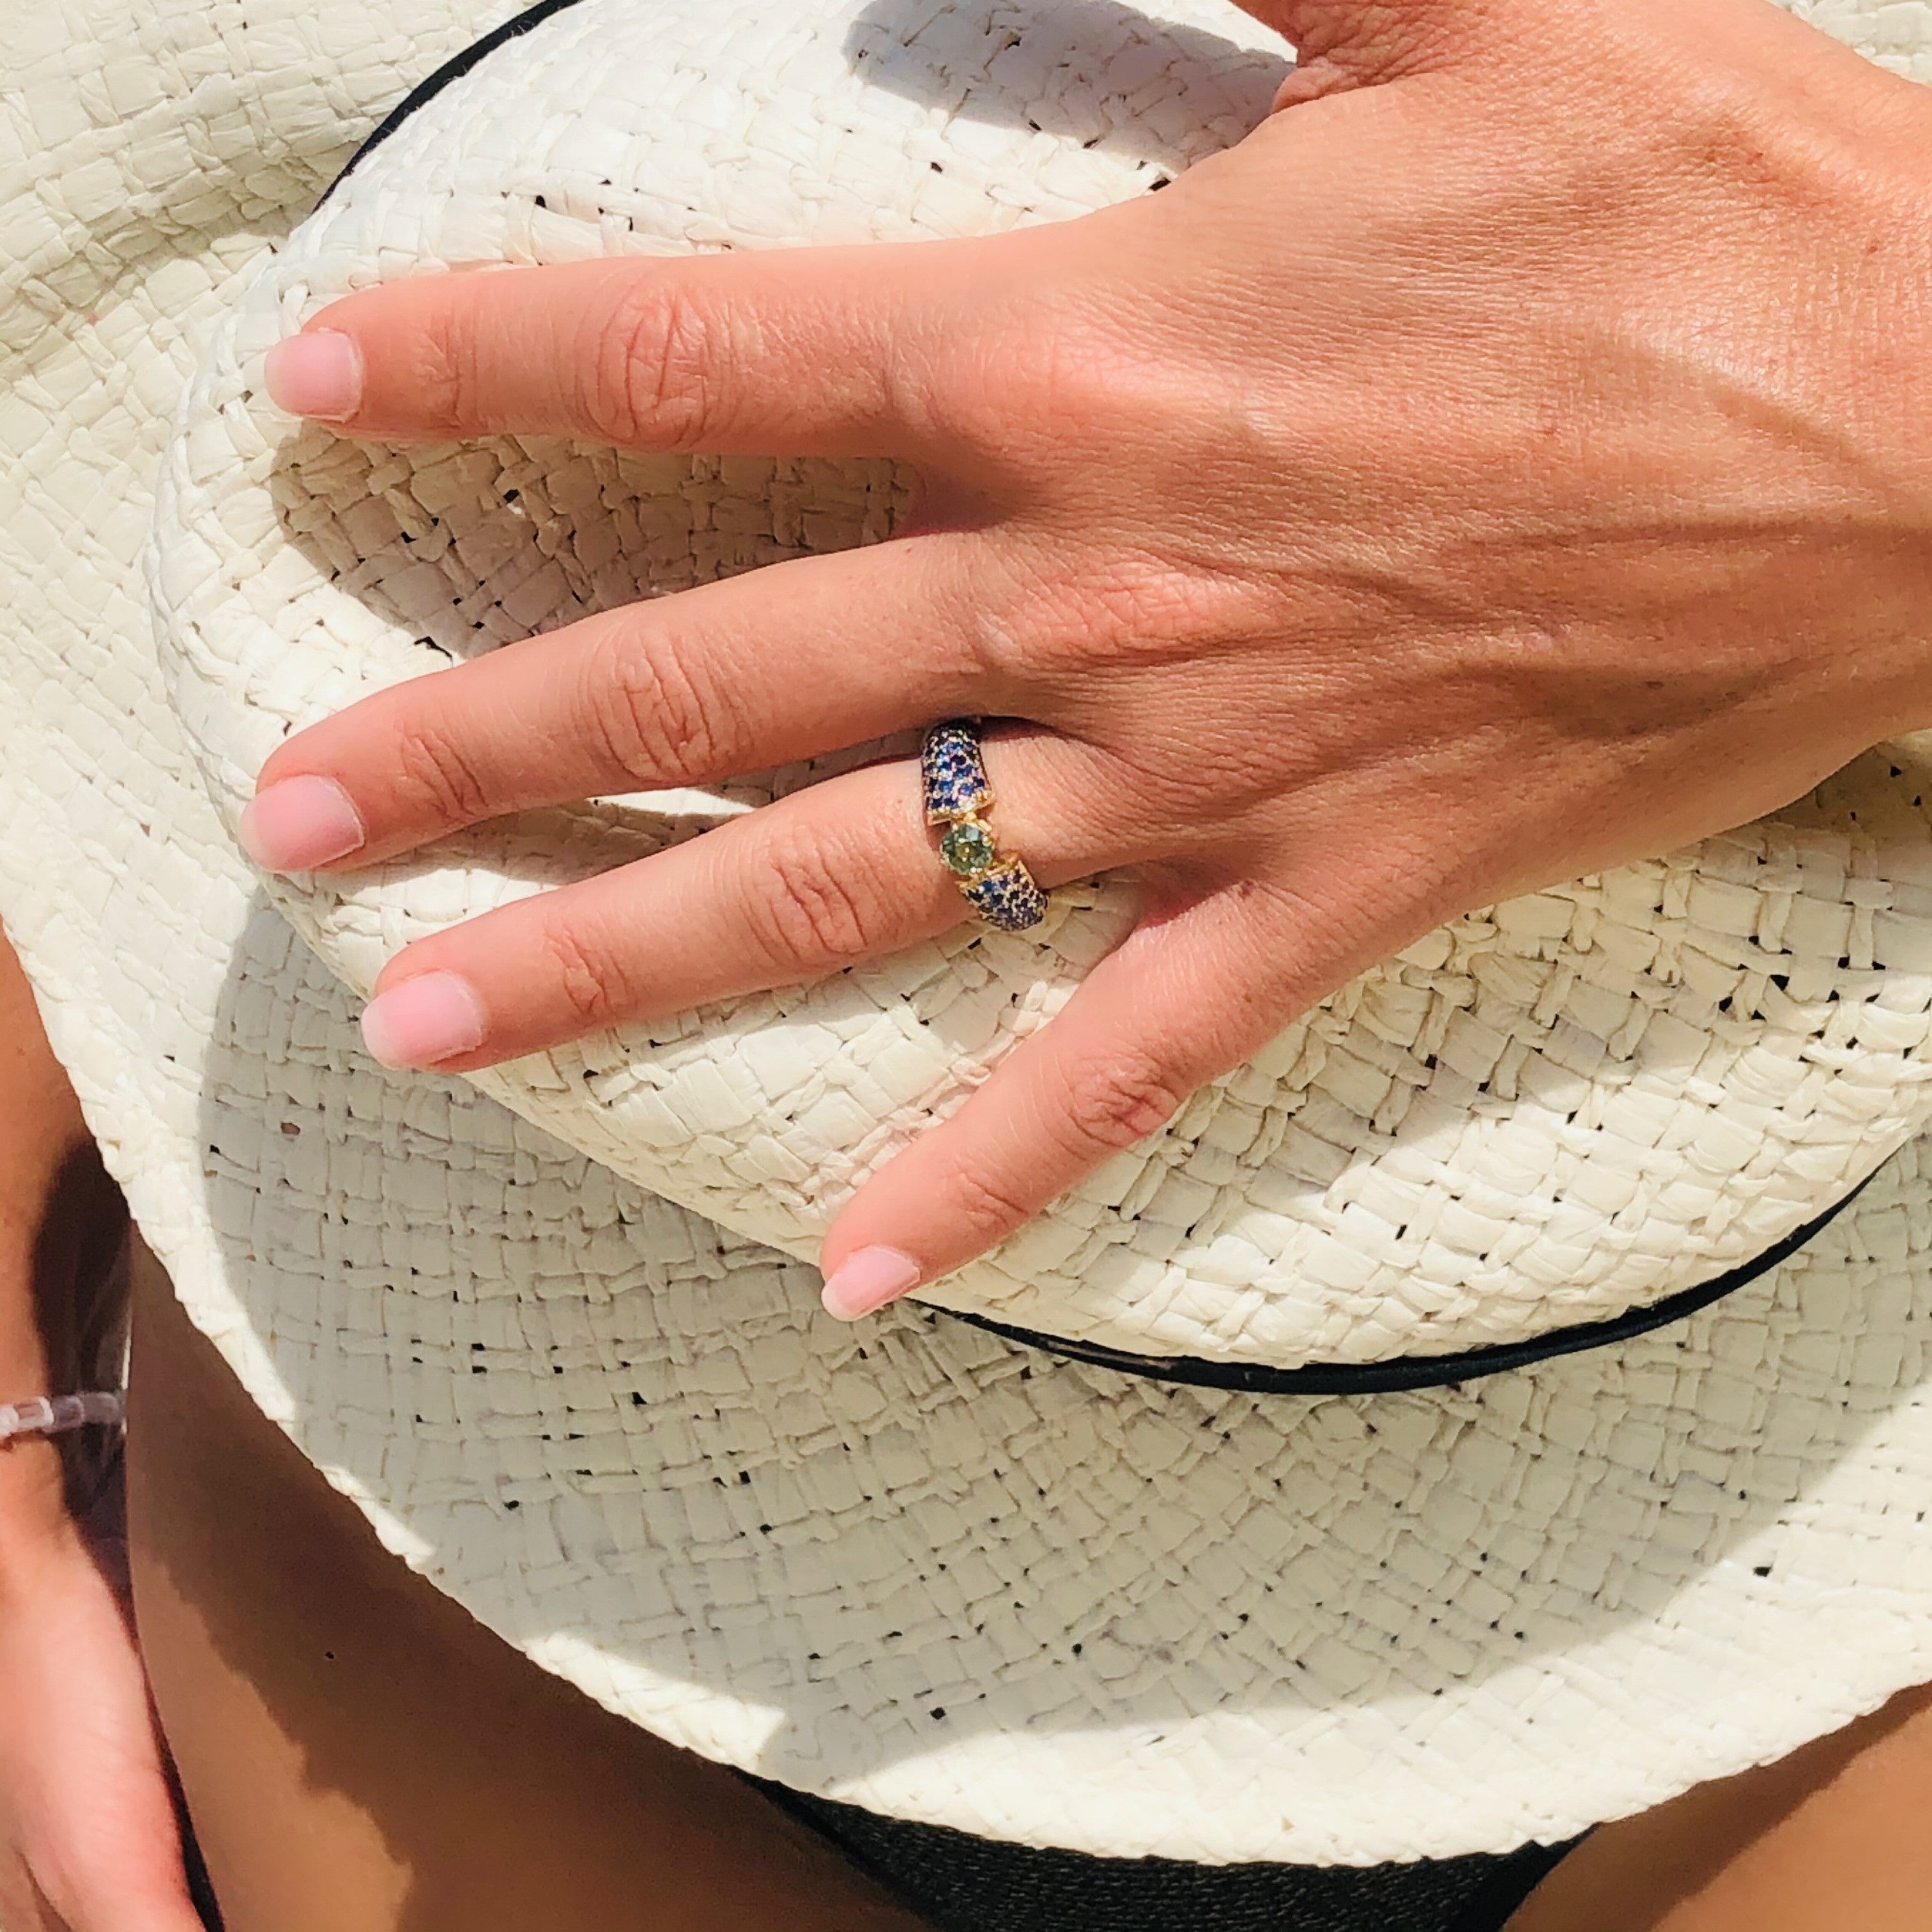 Blue and Green Sapphire Ring photographed on models ring finger. Panama hat in the background